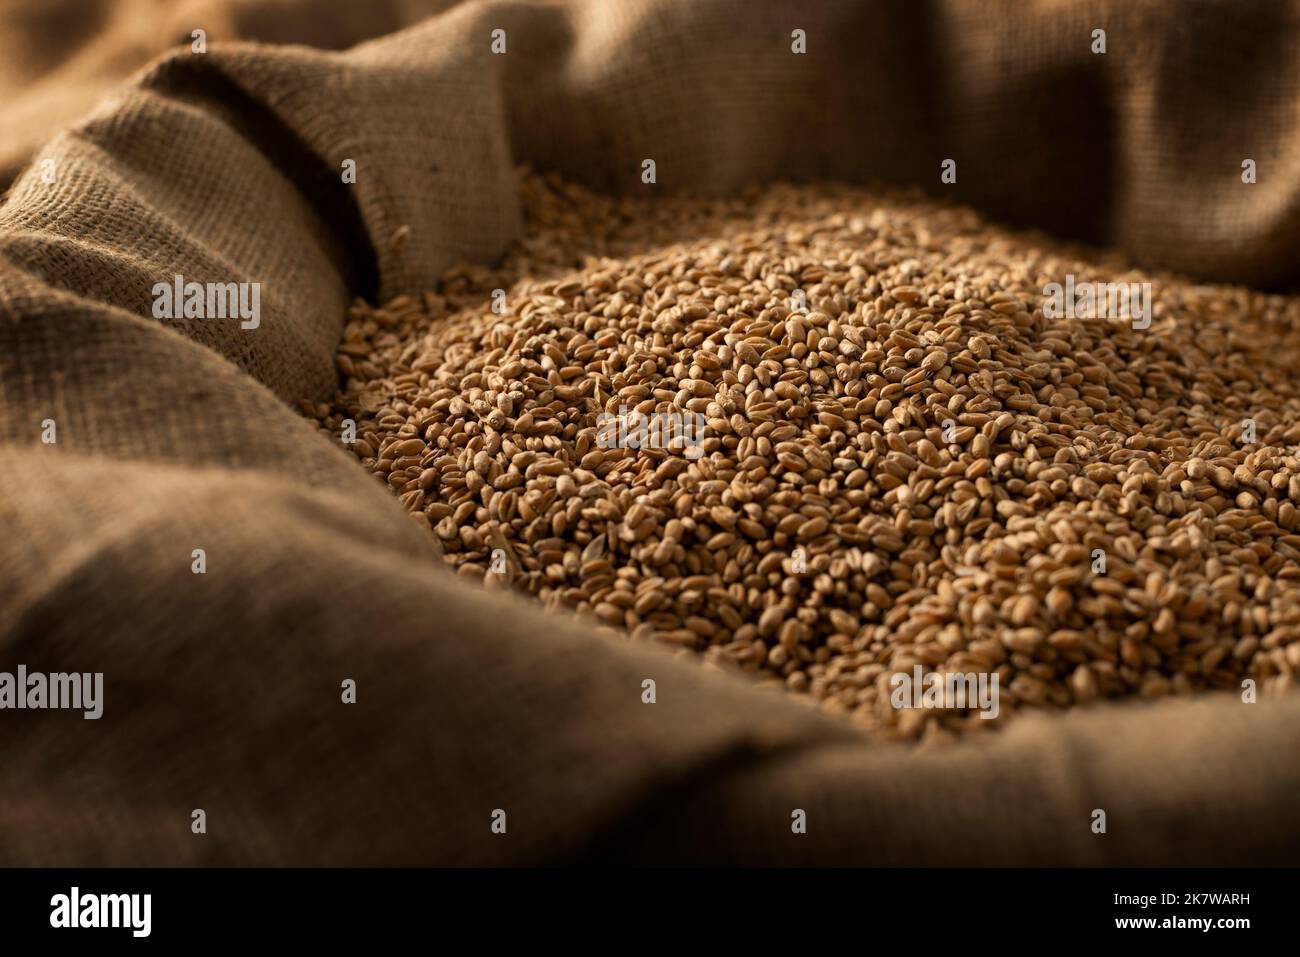 Burlap sack filled with raw wheat grains Stock Photo